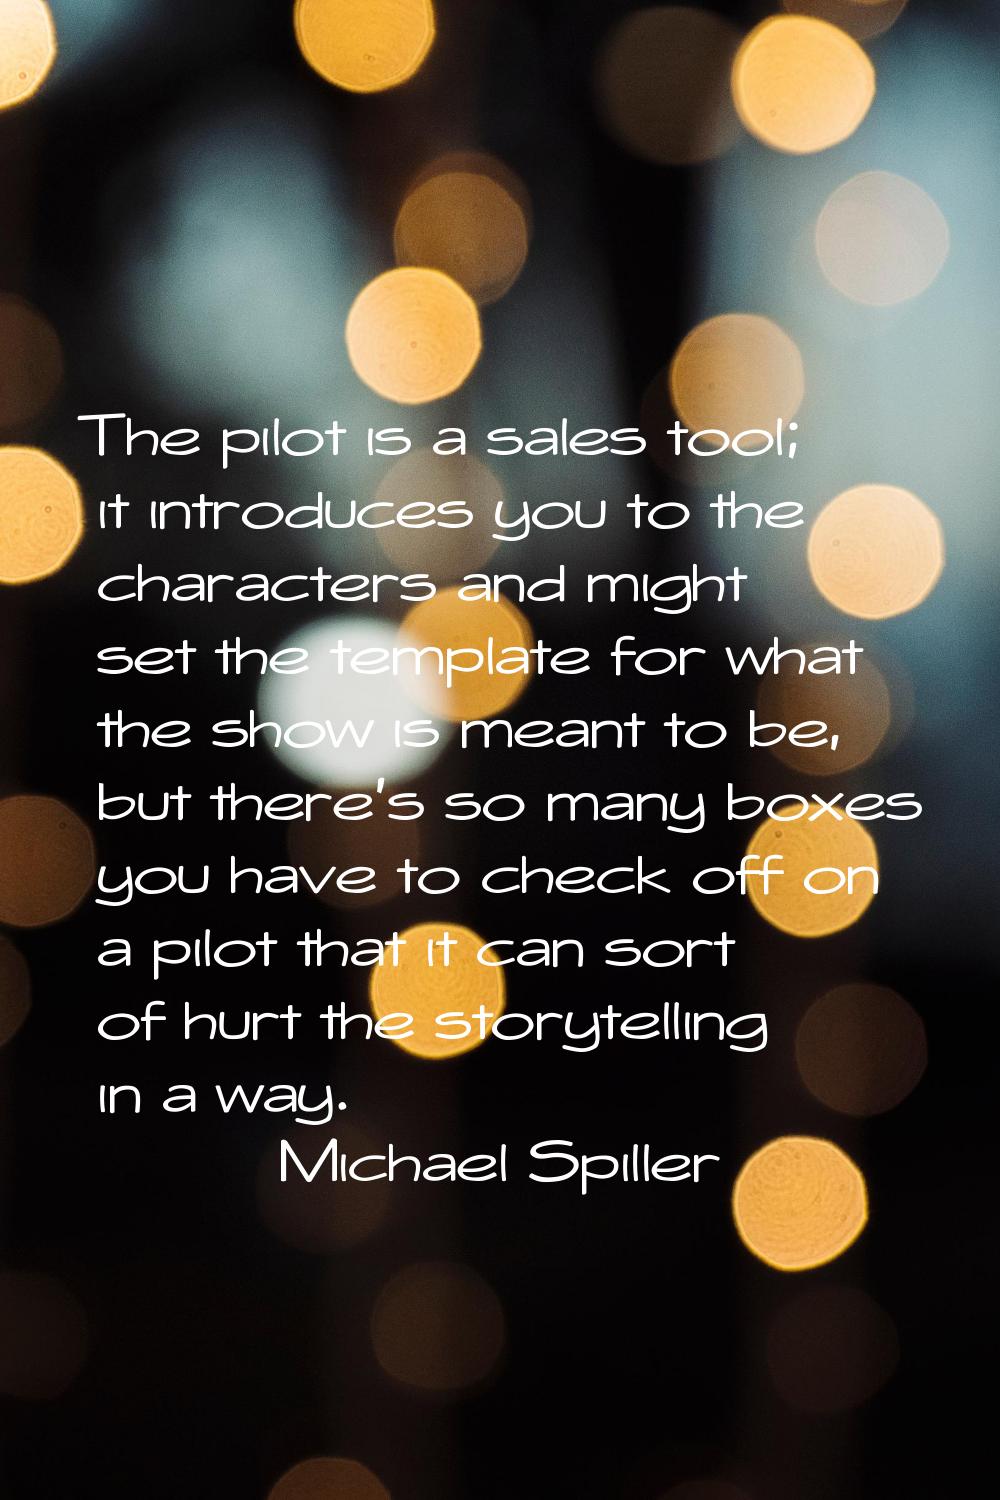 The pilot is a sales tool; it introduces you to the characters and might set the template for what 